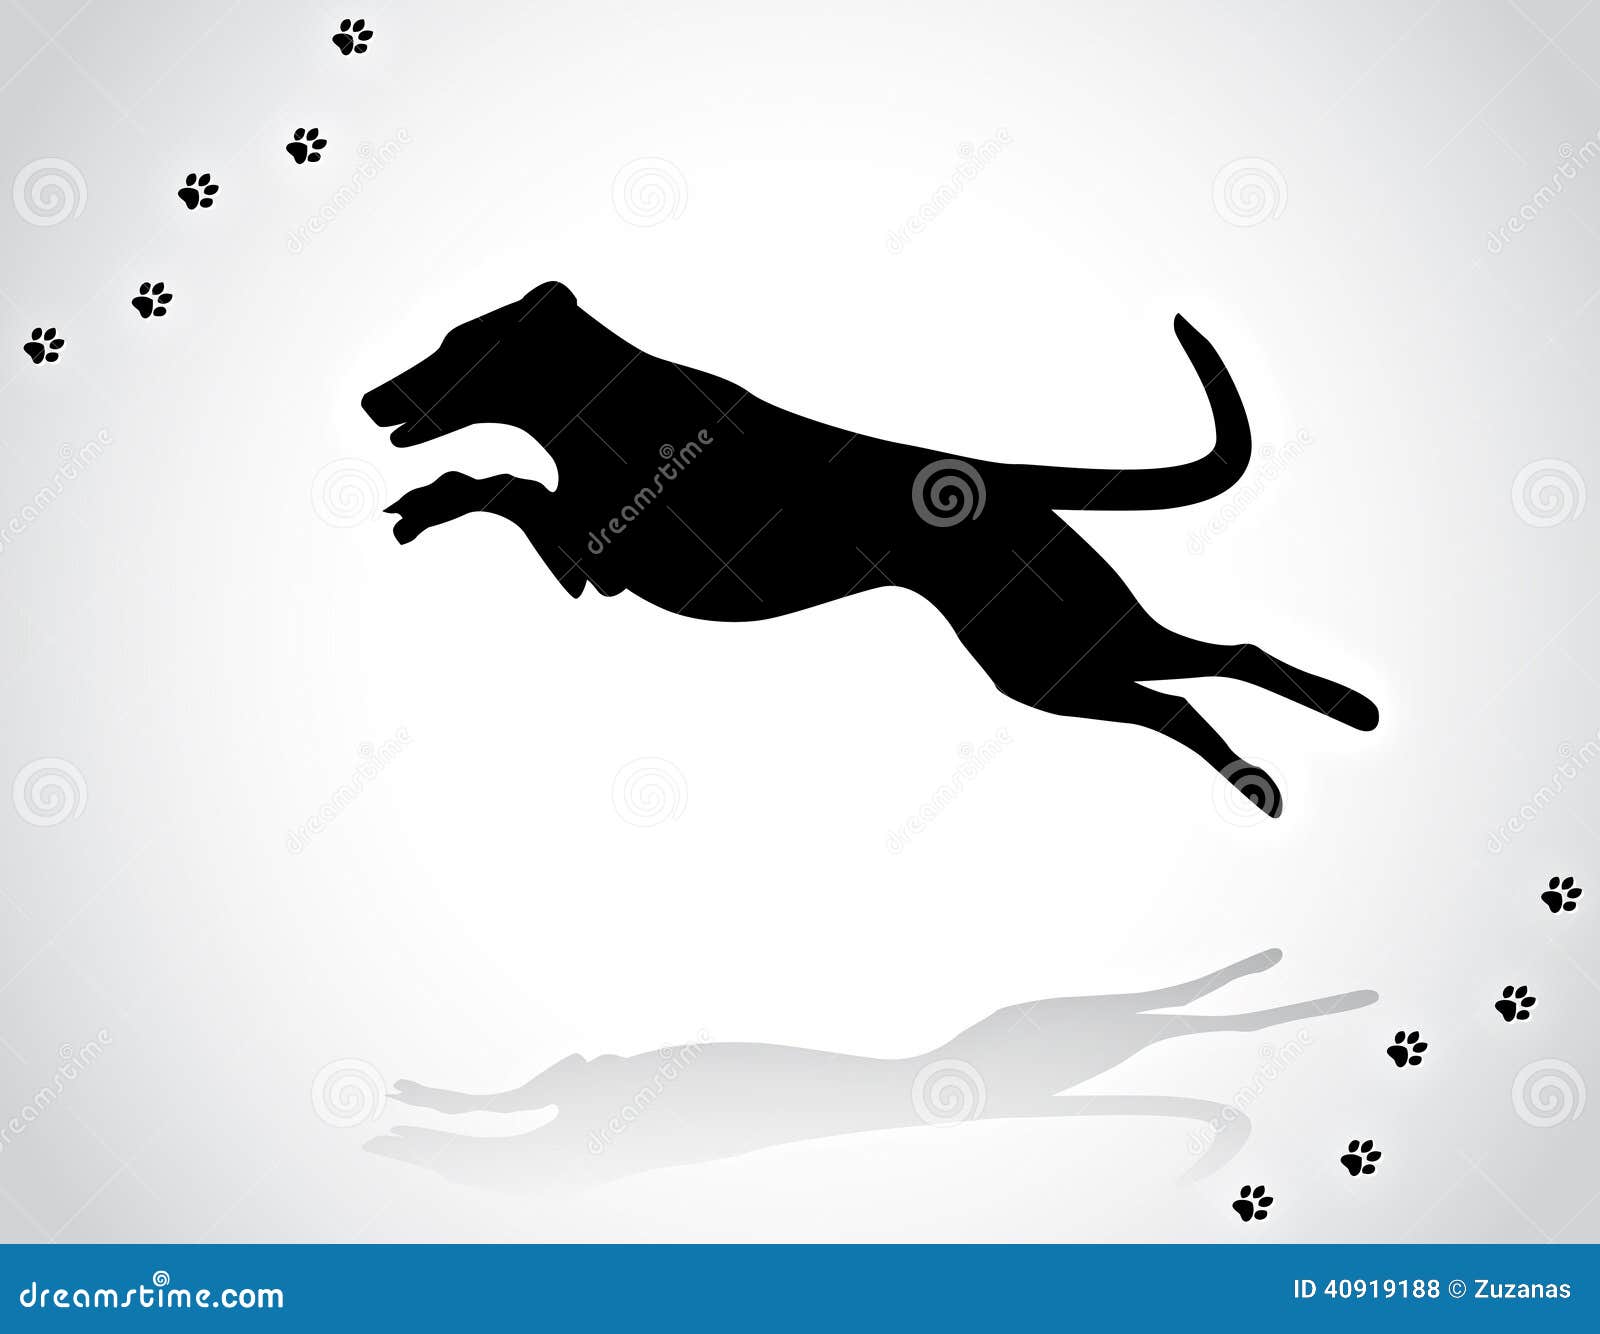 Jumping dog in agility stock vector. Illustration of